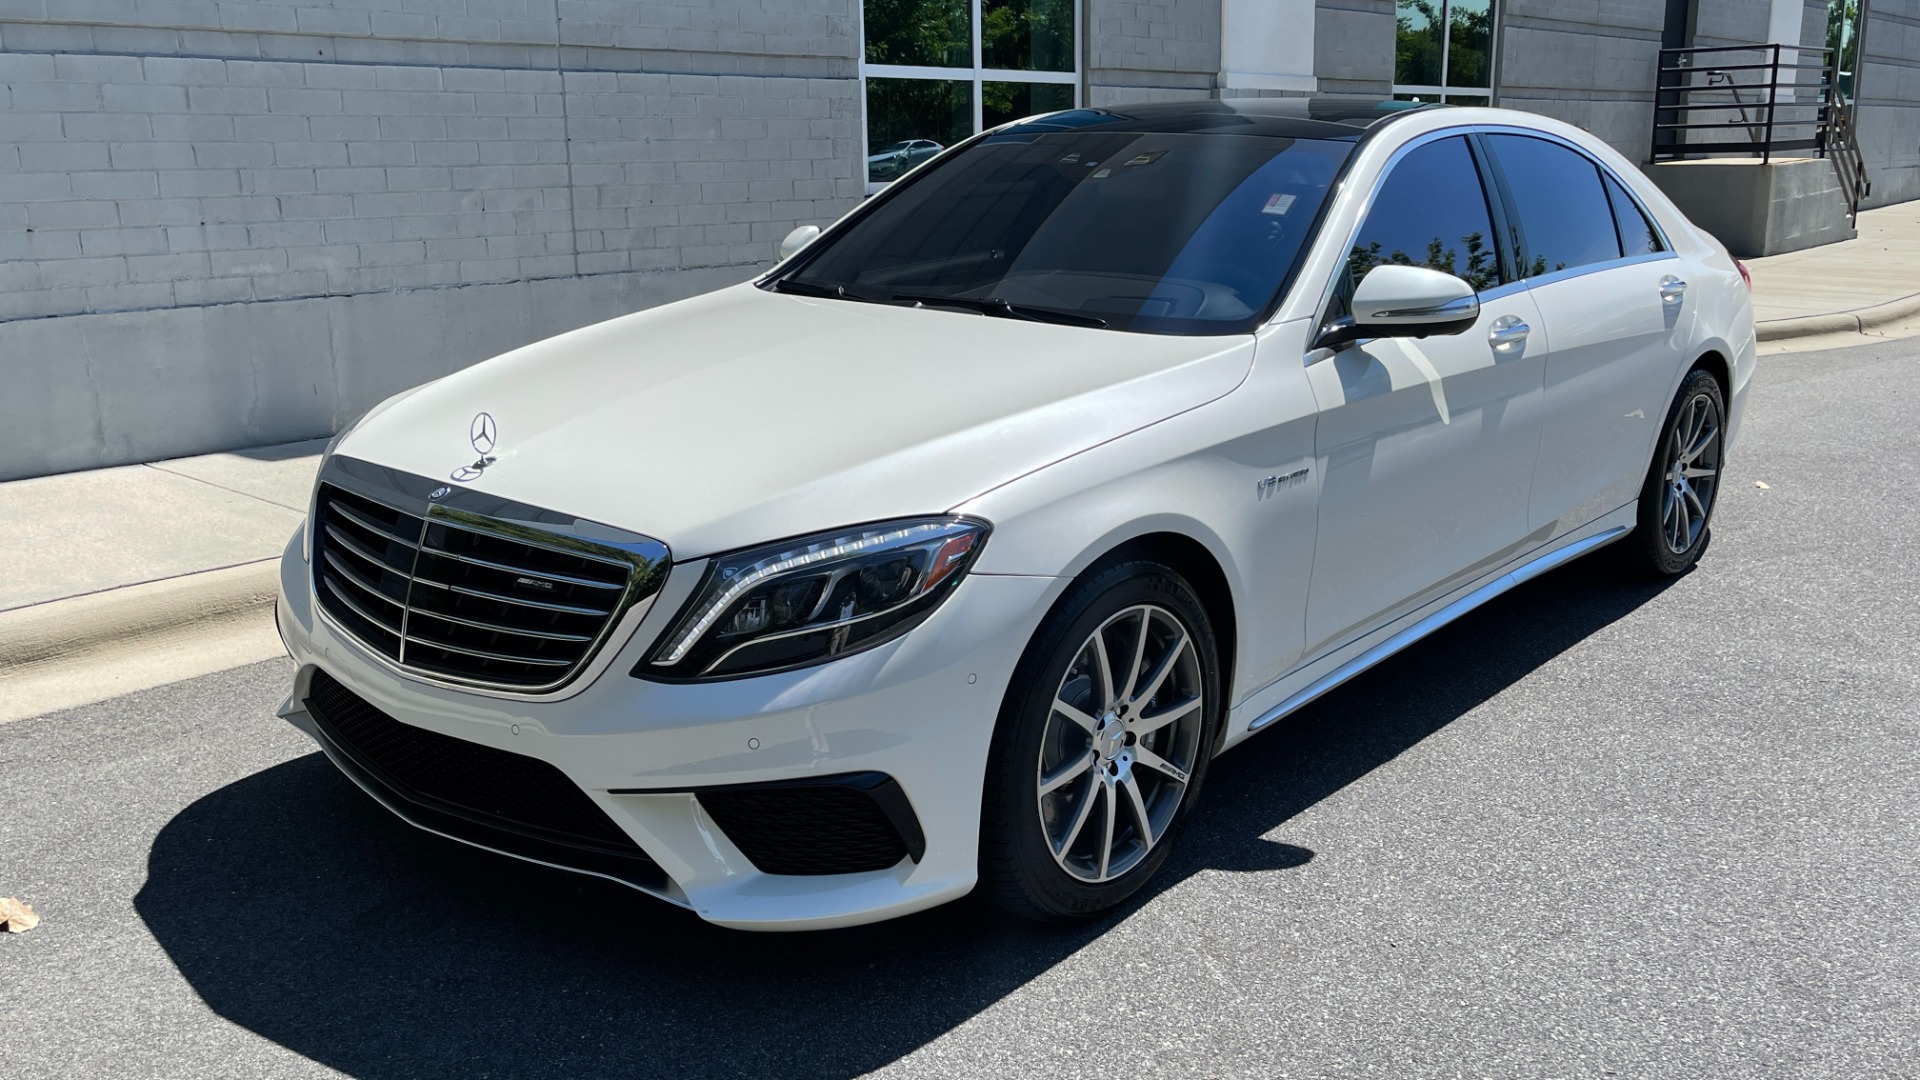 Used 2016 Mercedes-Benz S-Class AMG S63 / EXCLUSIVE TRIM / BURMESTER 3D HIGH END SOUND / DRIVER ASSISTANCE  for sale Sold at Formula Imports in Charlotte NC 28227 5